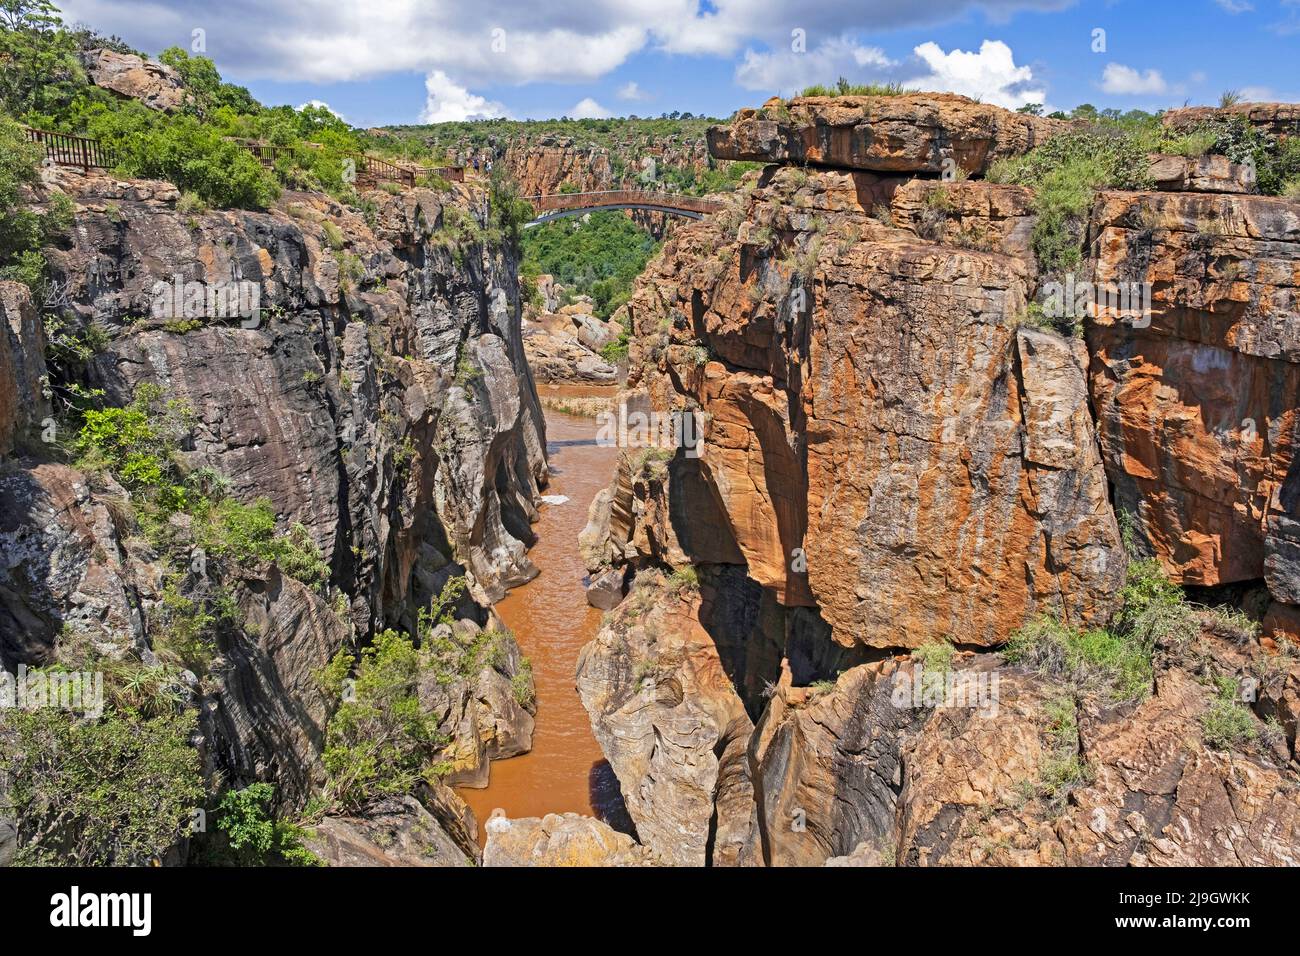 Bourke's Luck Potholes near Moremela marks the beginning of the Blyde River Canyon / Blyderivierspoort, Mpumalanga province, South Africa Stock Photo